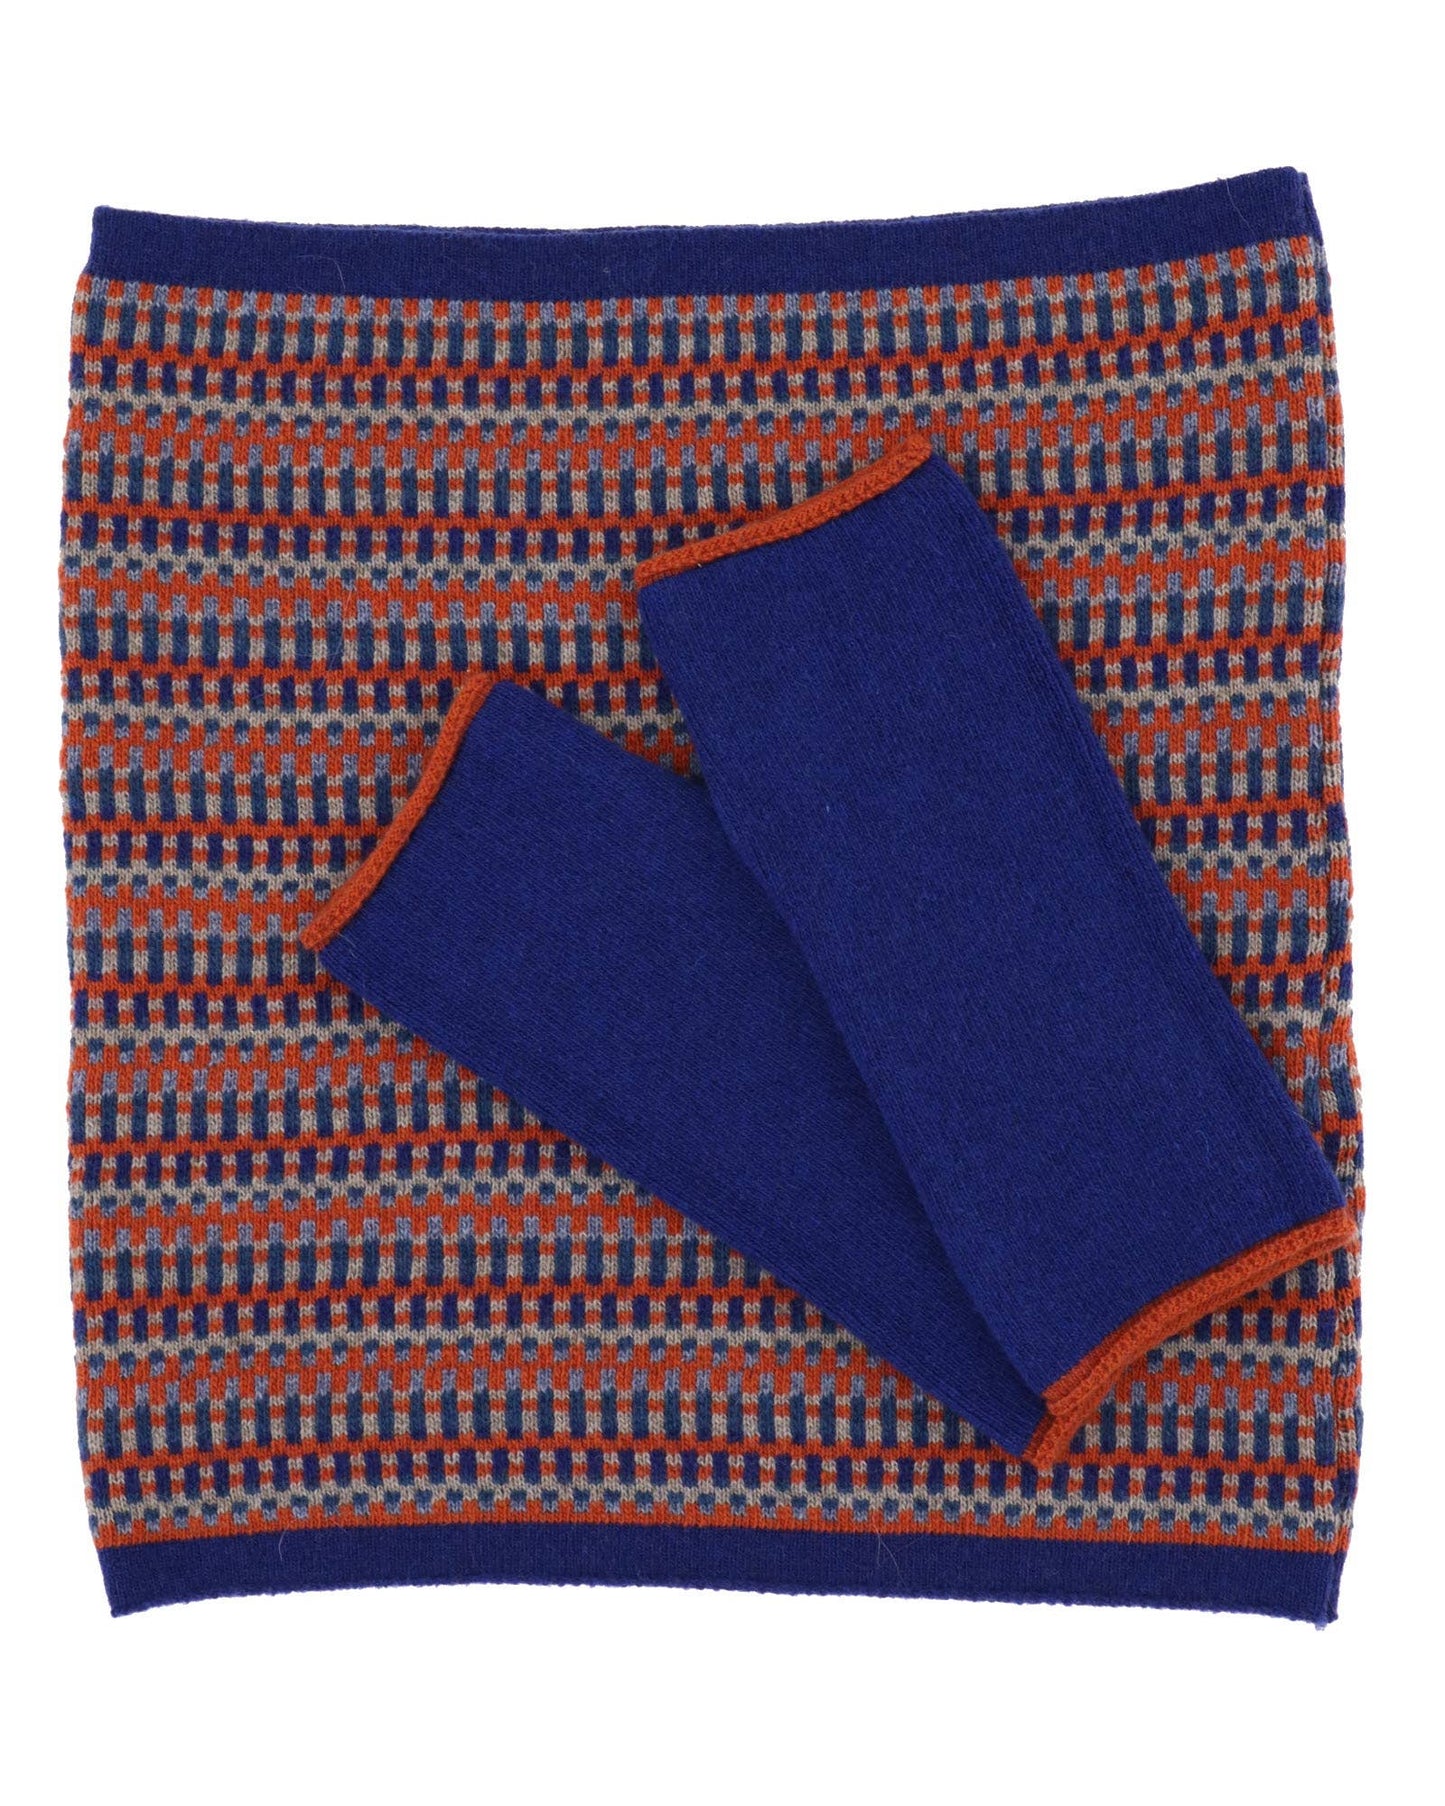 Cadenza Cashmere Blend Contrast Edge Wrist Warmers: Peacock and Ultraviolet